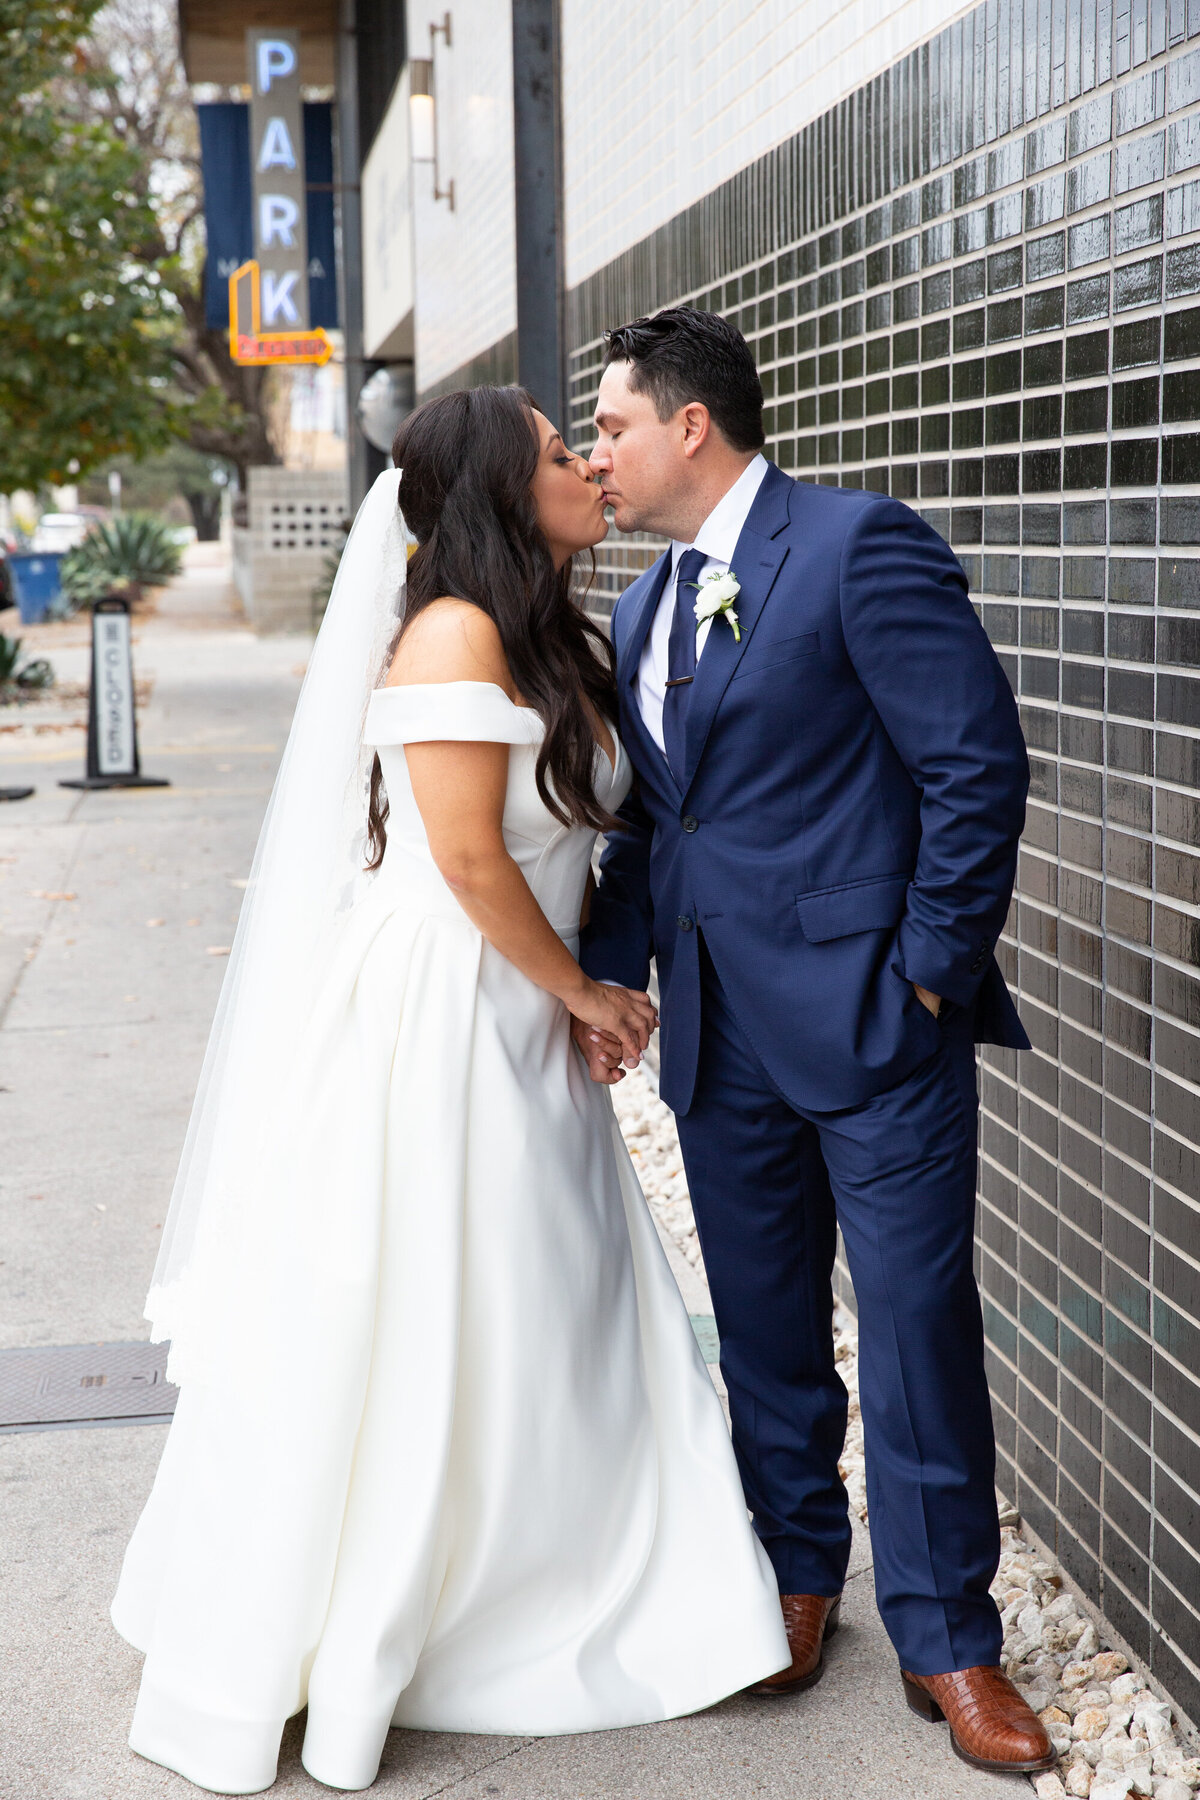 A bride and groom captured by an Austin wedding photographer, sharing a passionate kiss in front of a stunning building.